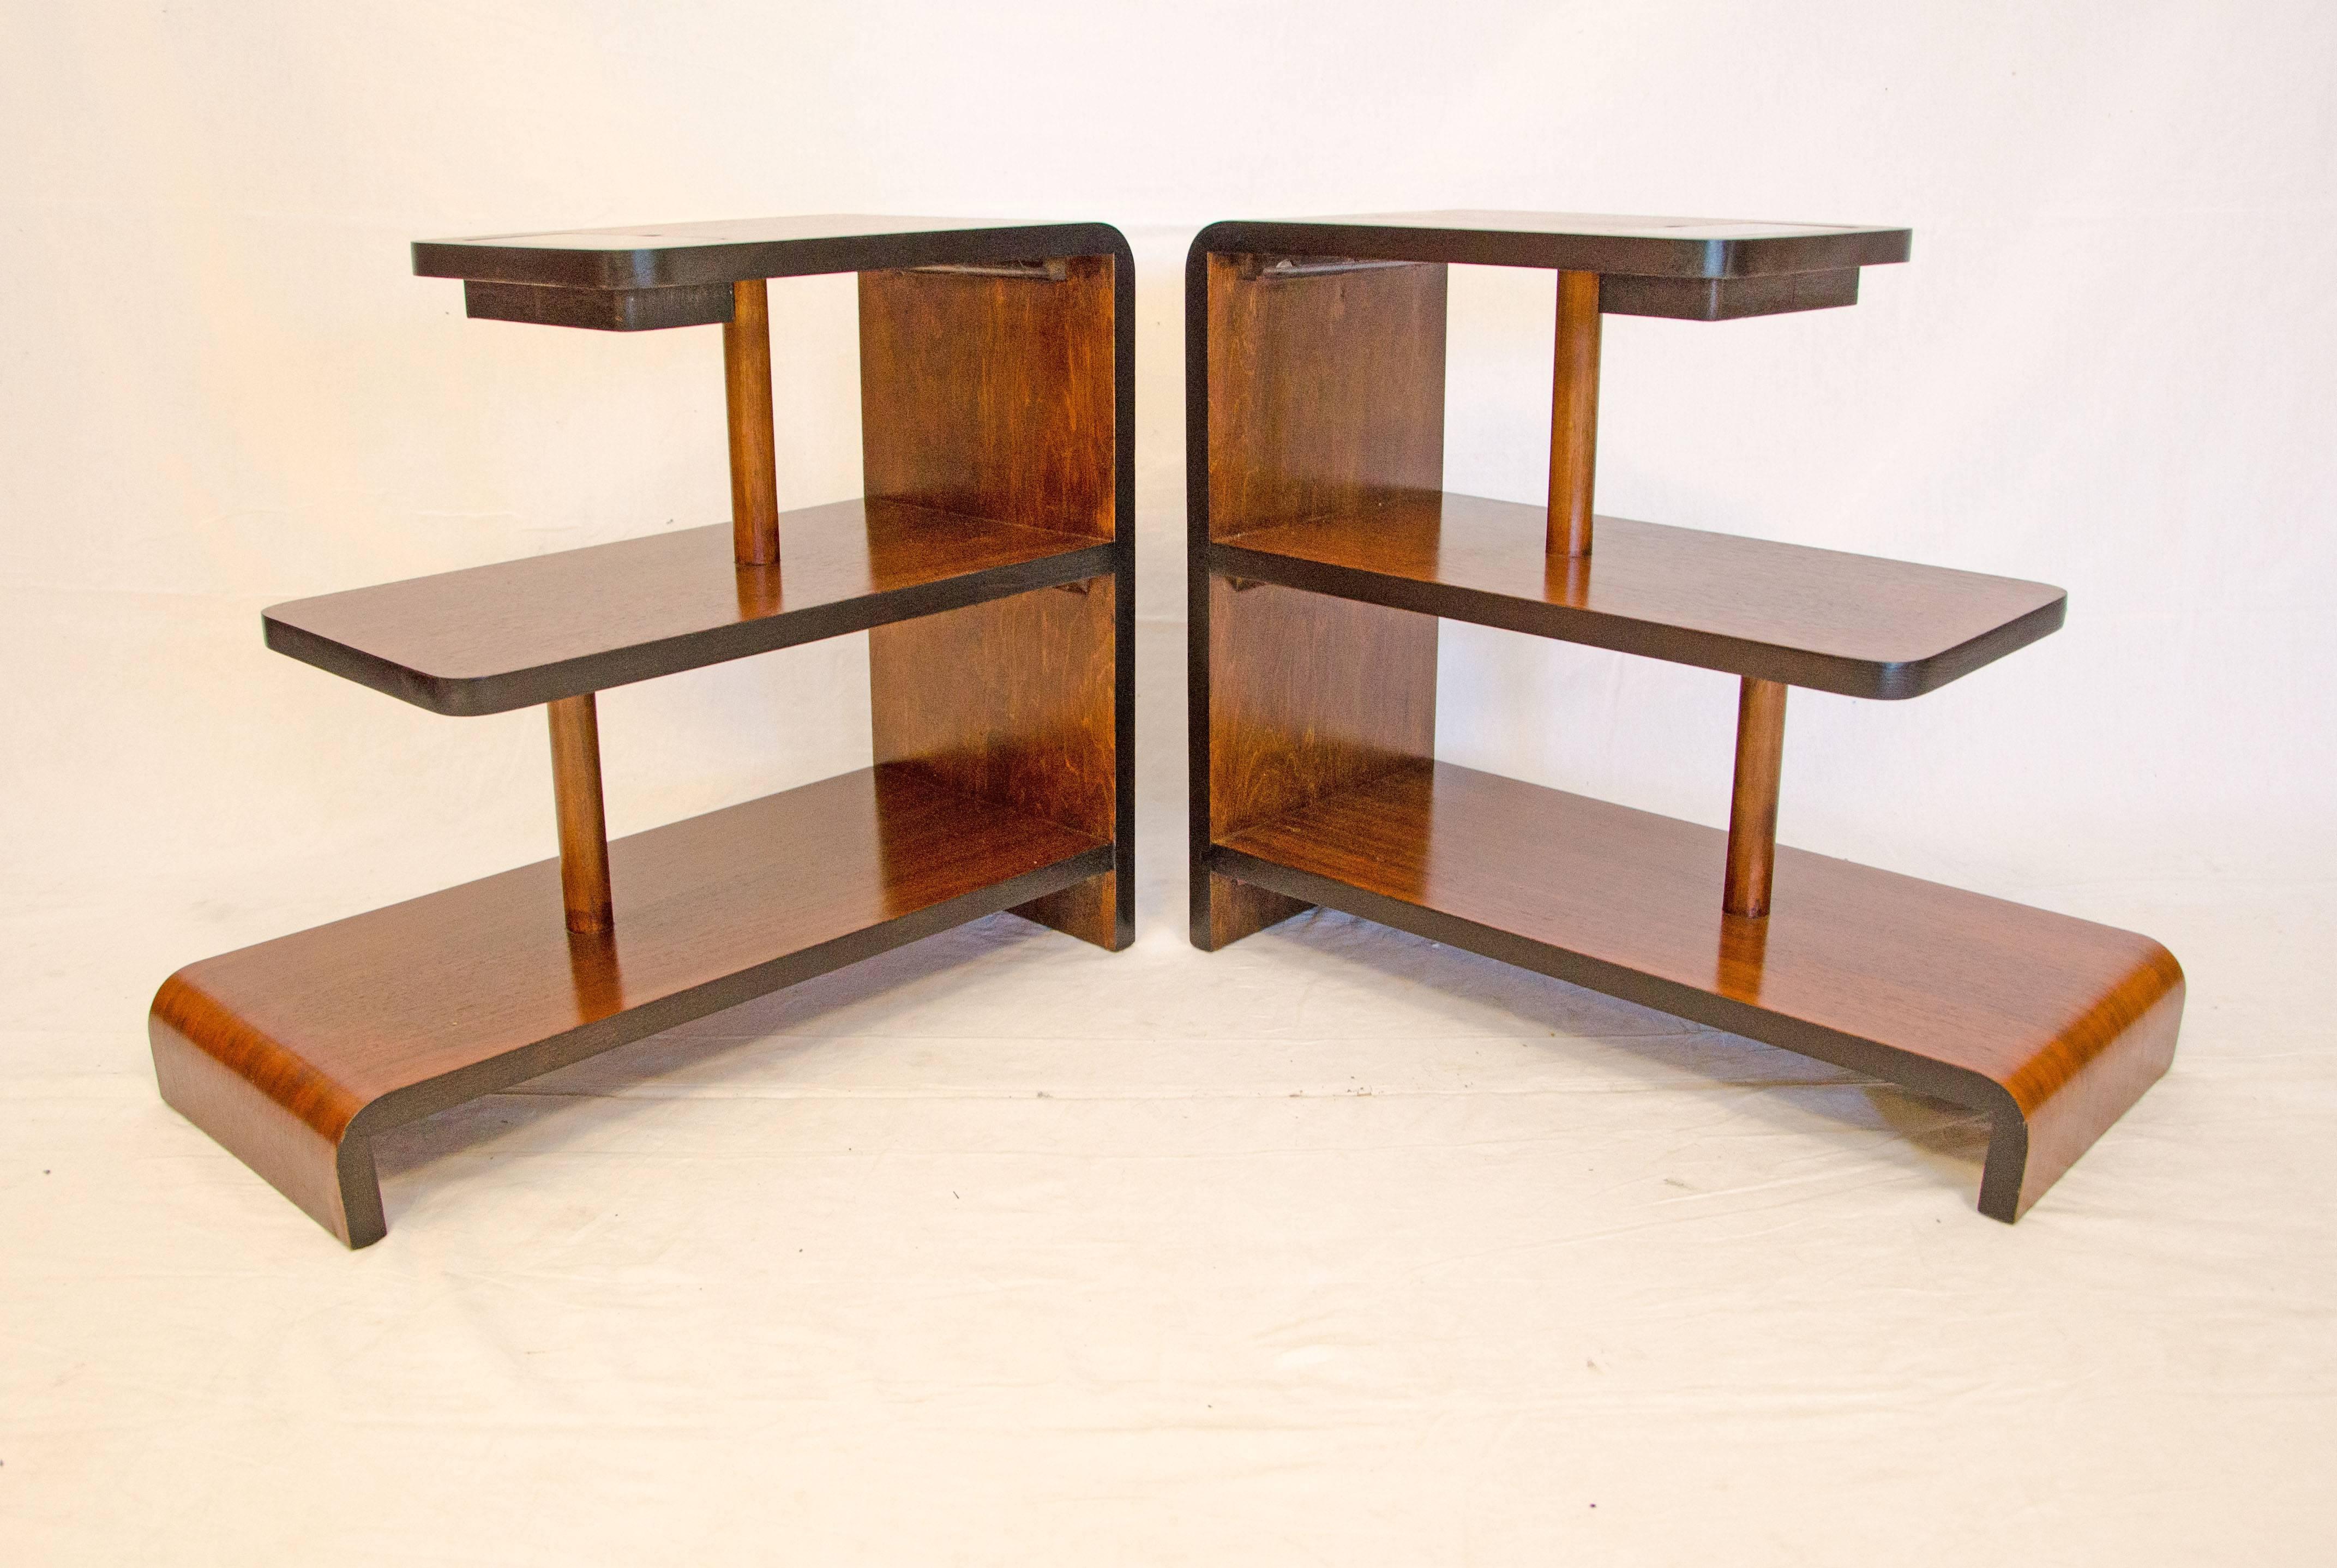 Very nice smaller scale end tables consisting of three graduated sized levels 15 3/4", 20", 24" long. The top has a small divided tray covered by a removable piece of black glass. The edges of the tables are accented by the black as